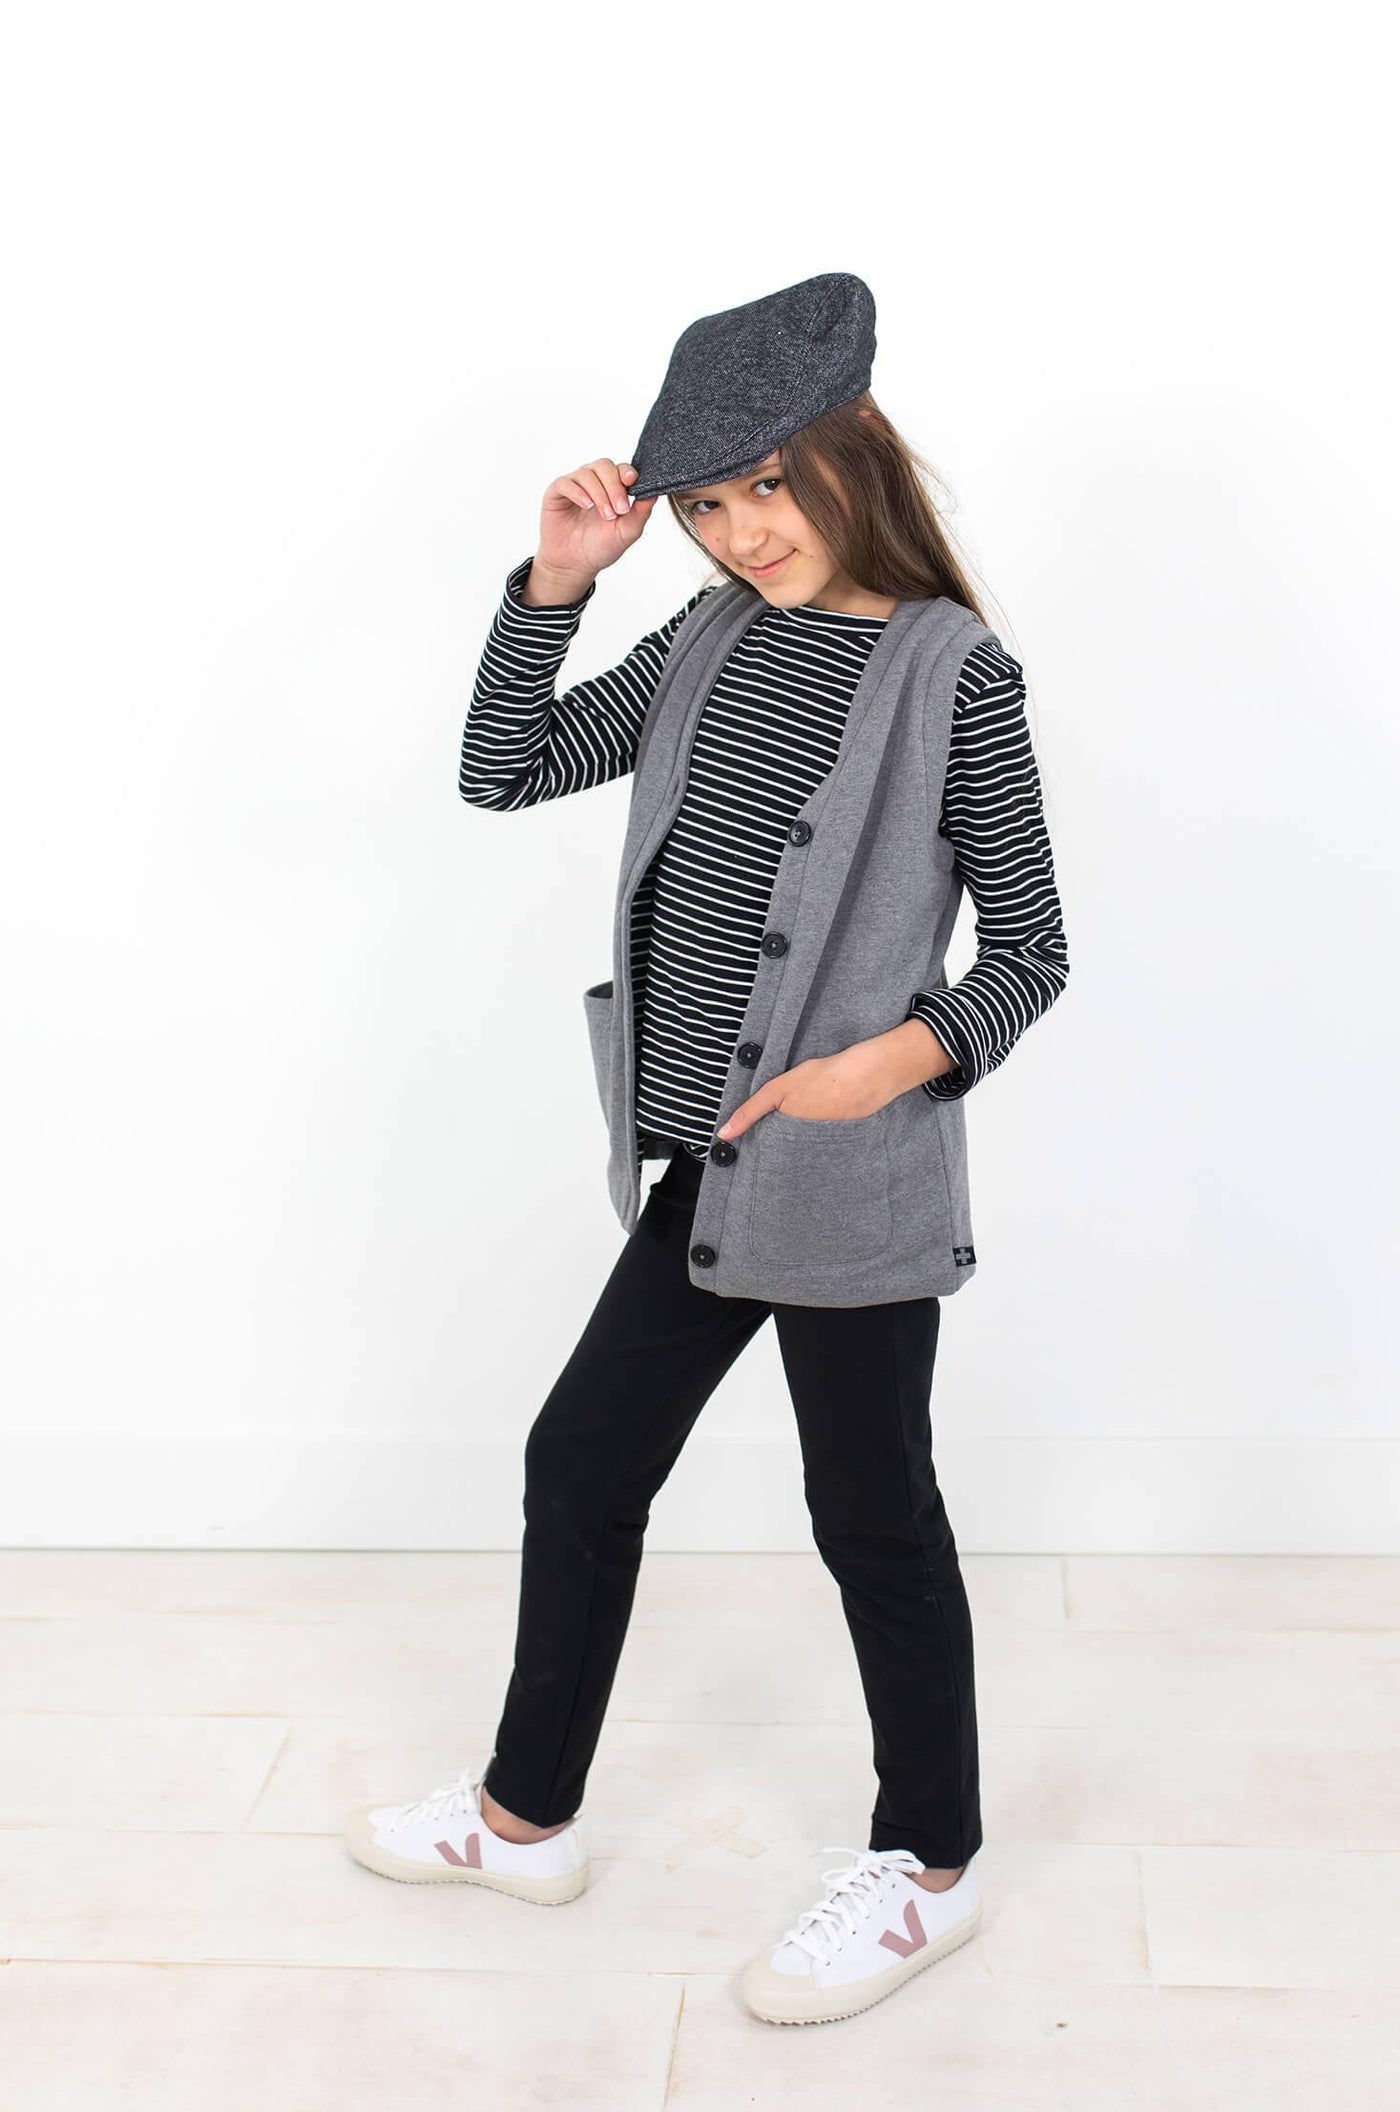 Girl wearing grey organic cotton vest and grey hat.